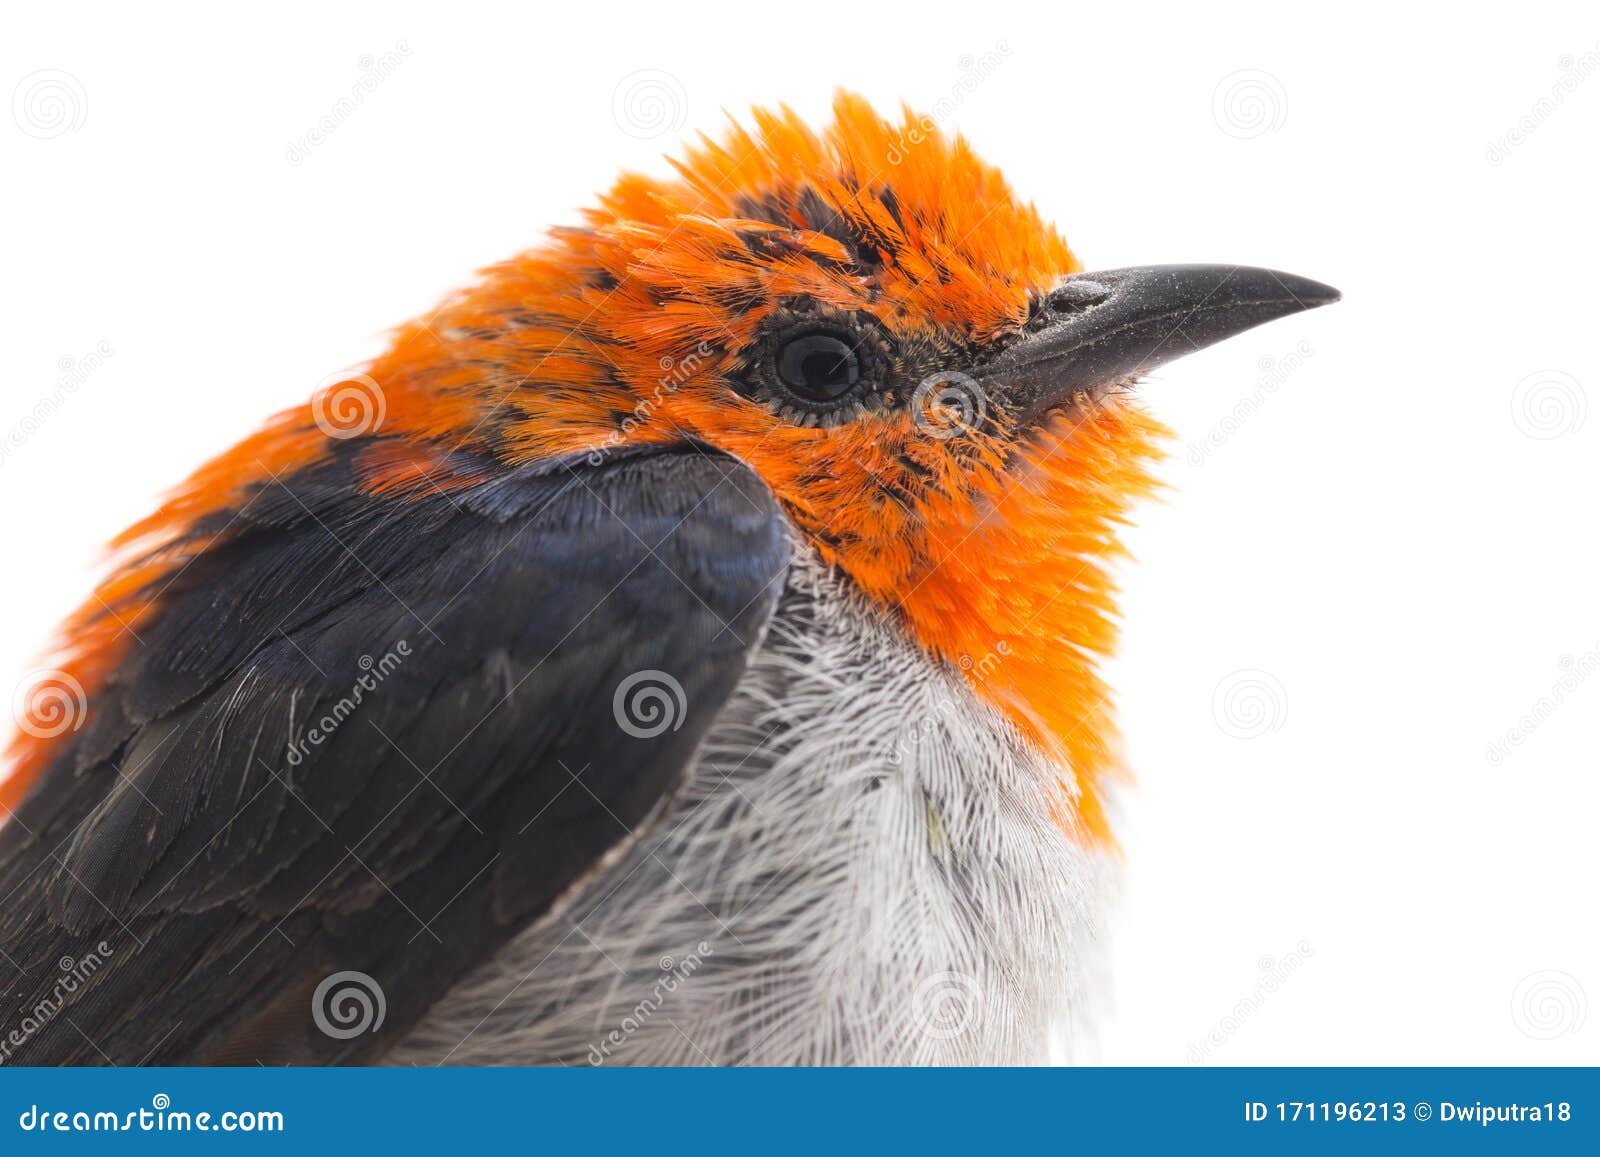 the scarlet-headed flowerpecker dicaeum trochileum is a species of bird in the family dicaeidae. it is endemic to indonesia.